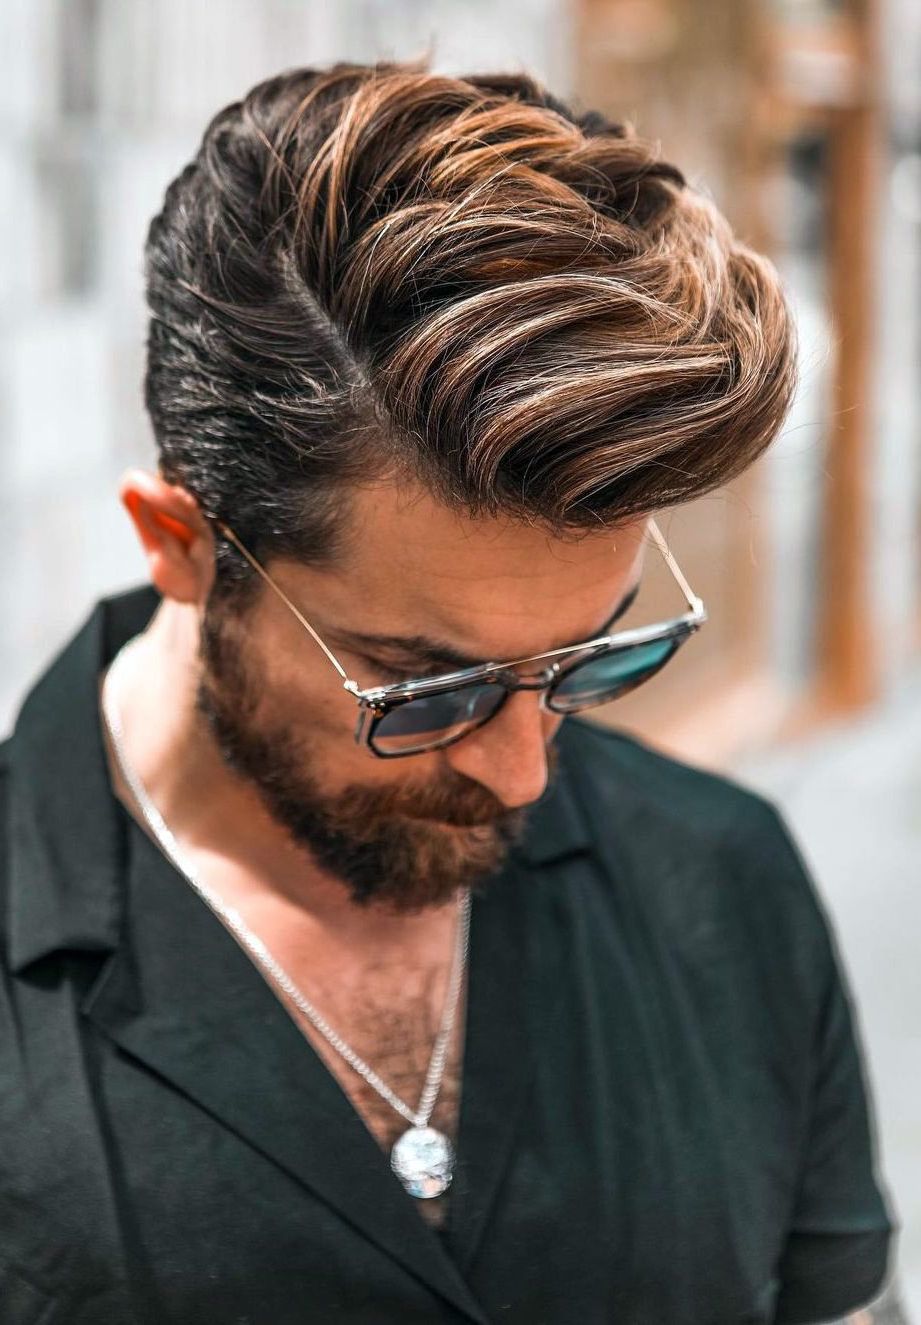 30 Side Part Haircuts: A Classic Style For Gentlemen | Haircut Inspiration Inside Layered And Side Parted Hairstyles For Short Hair (View 4 of 20)